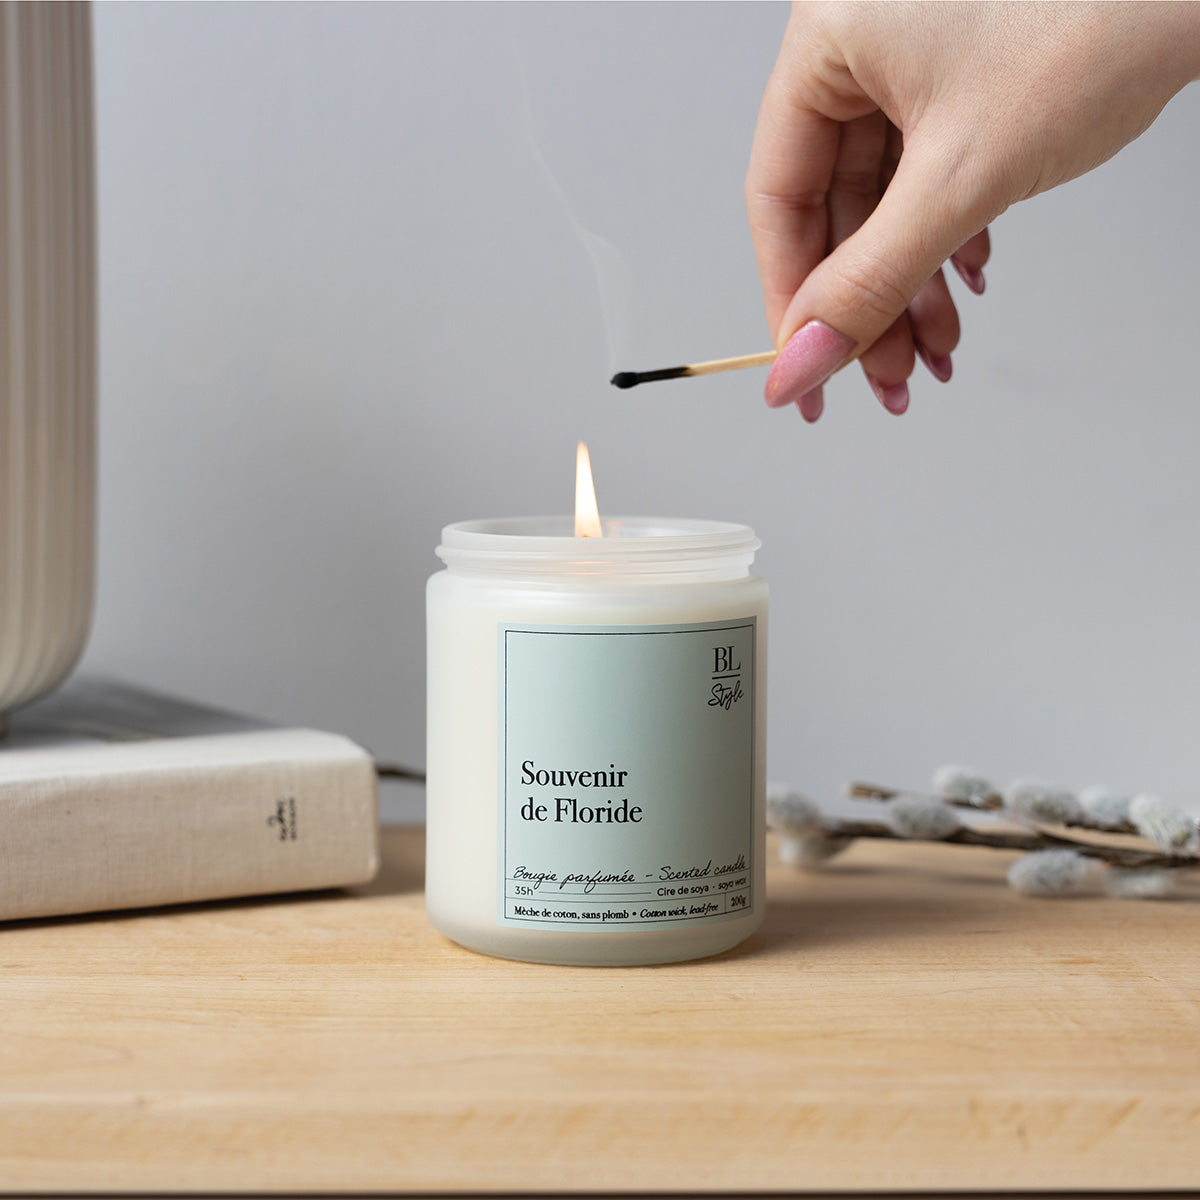 Promenade Sur Wall Street Candle